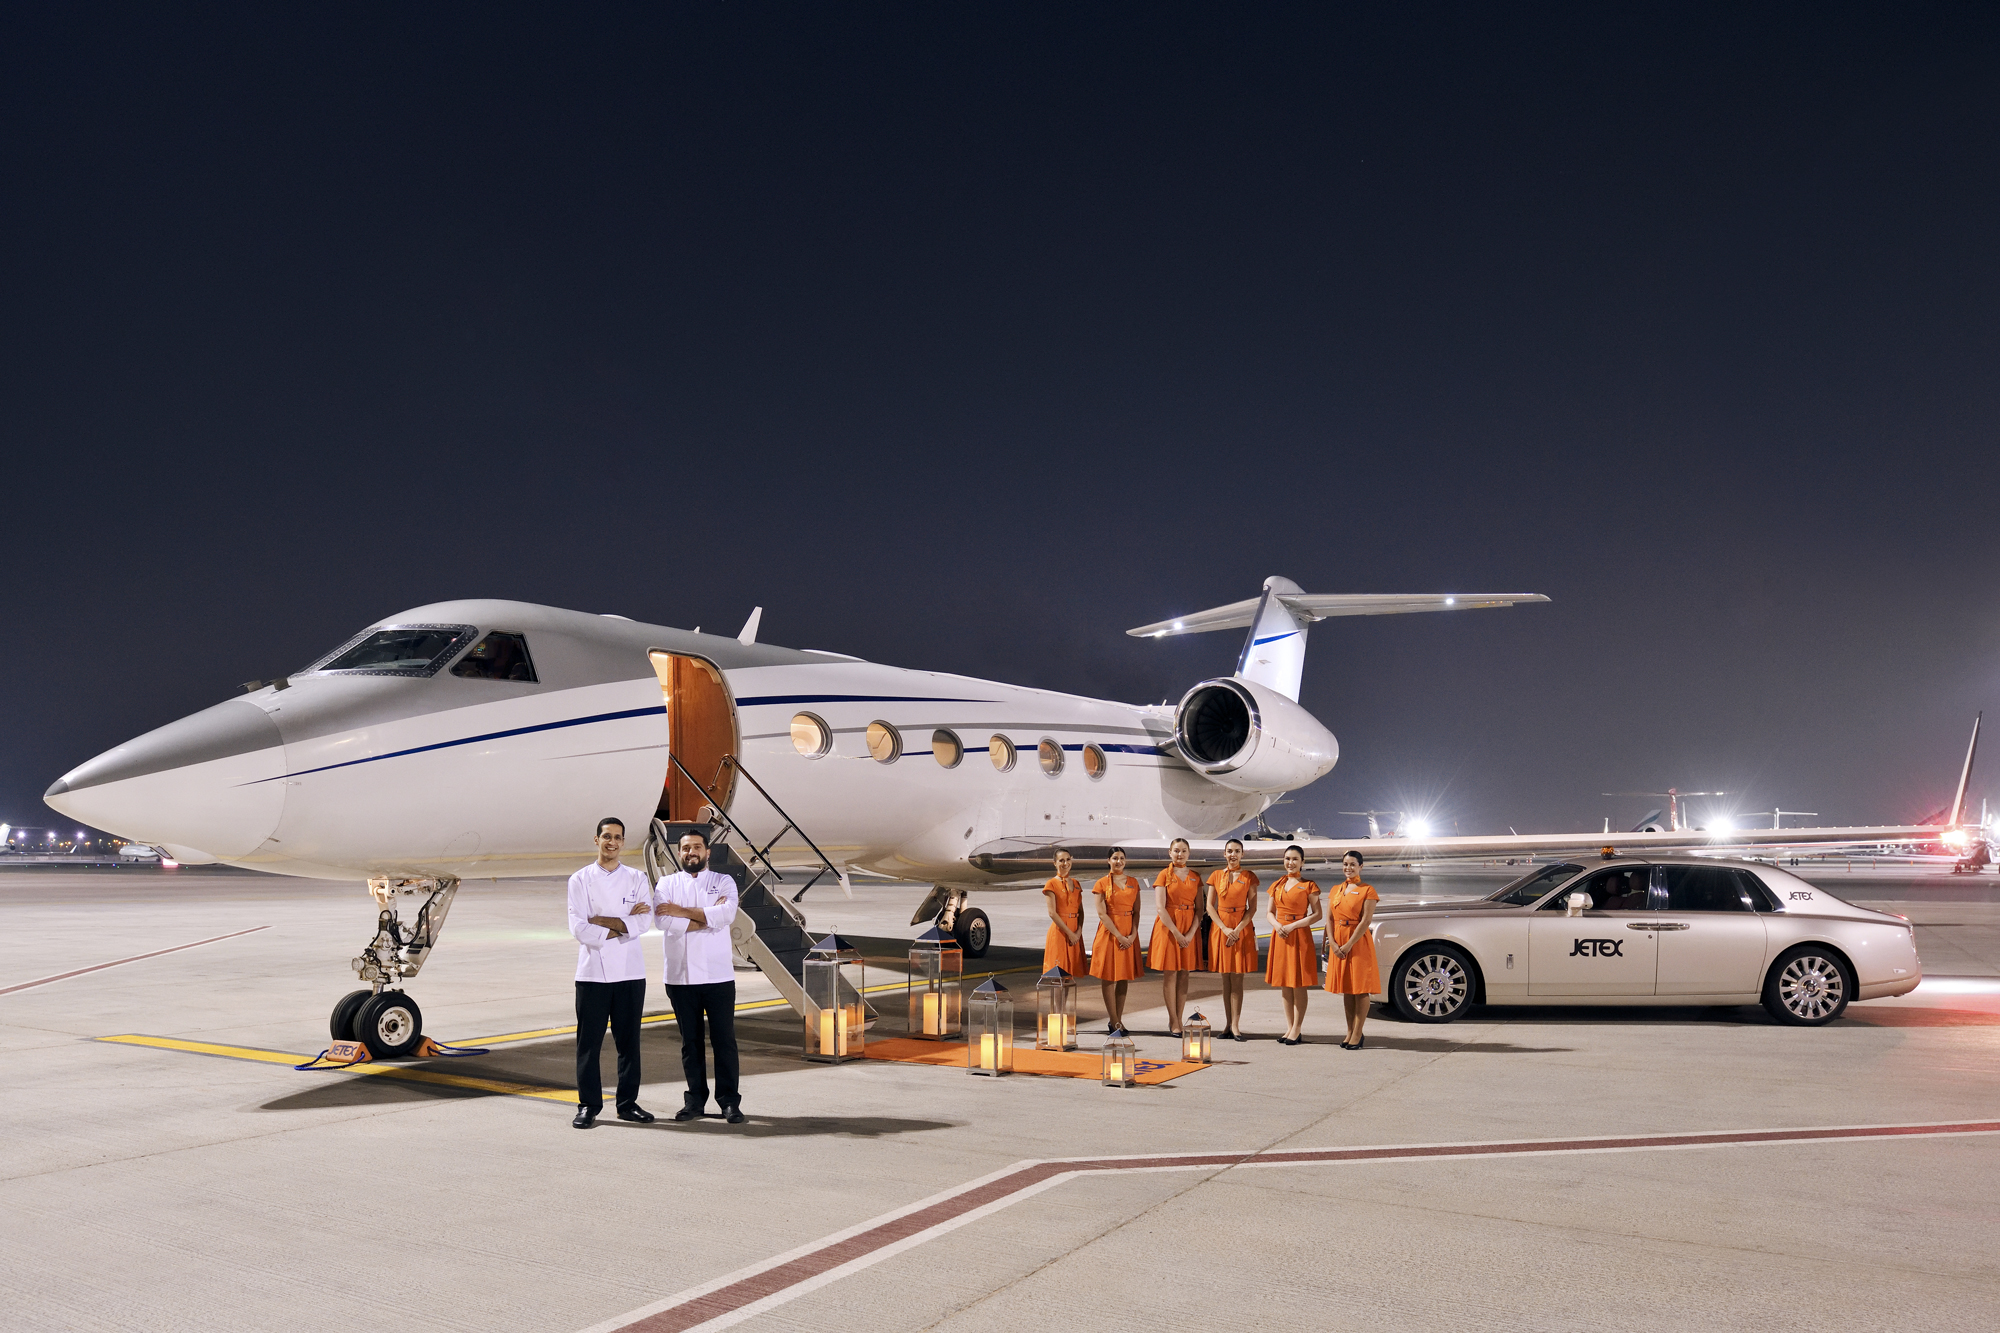 Fly High with Five: Dubai Hotel Unveils Lavish Private Jet for